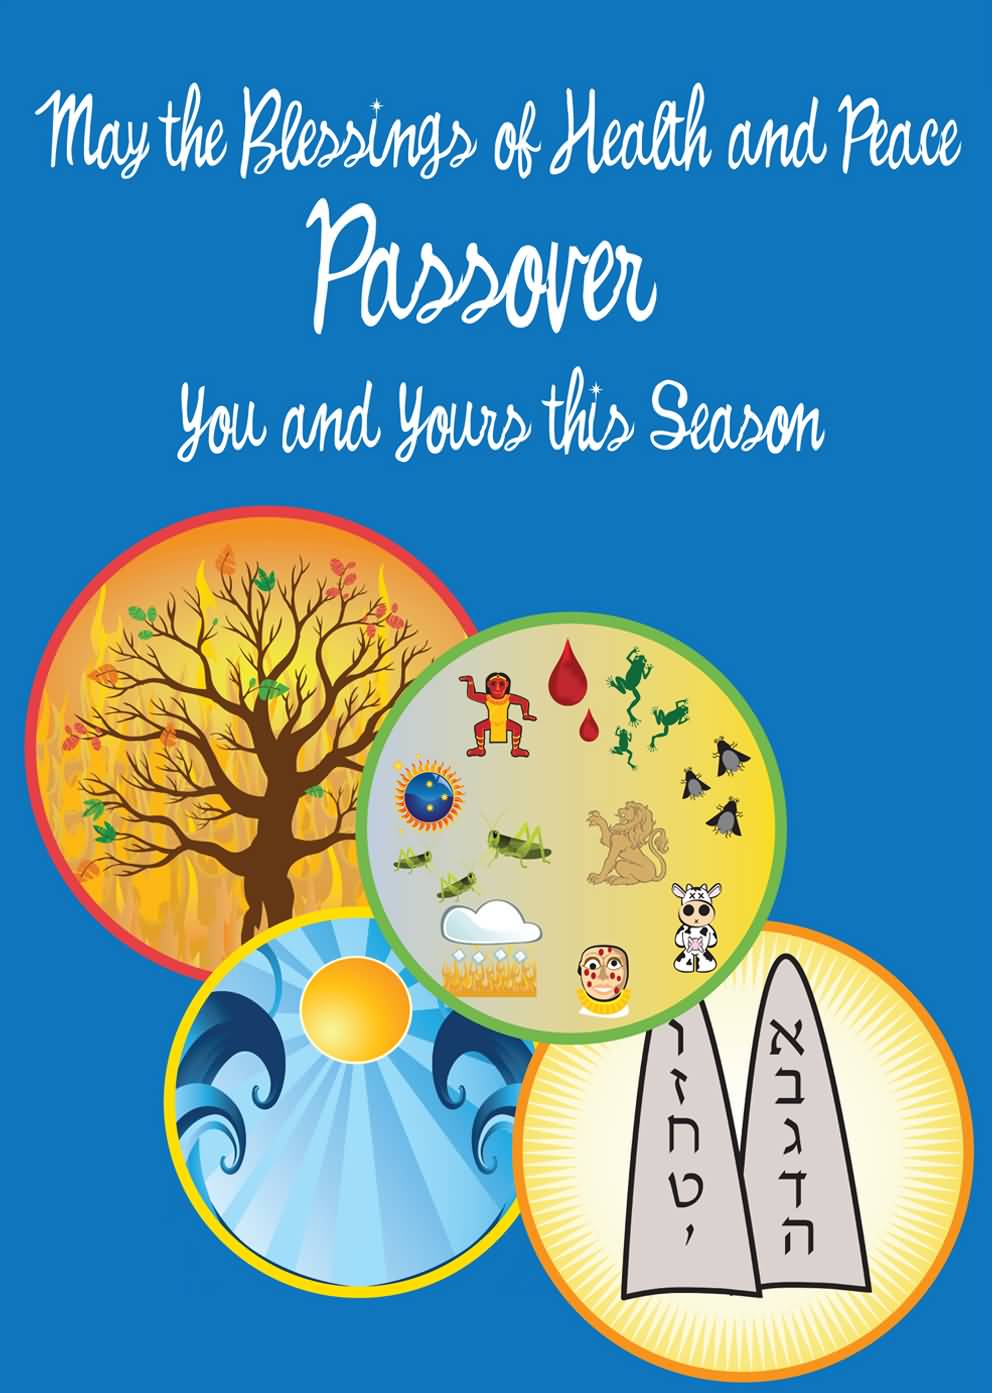 May The Blessings Of Health And Peace Passover You And Yours This Season